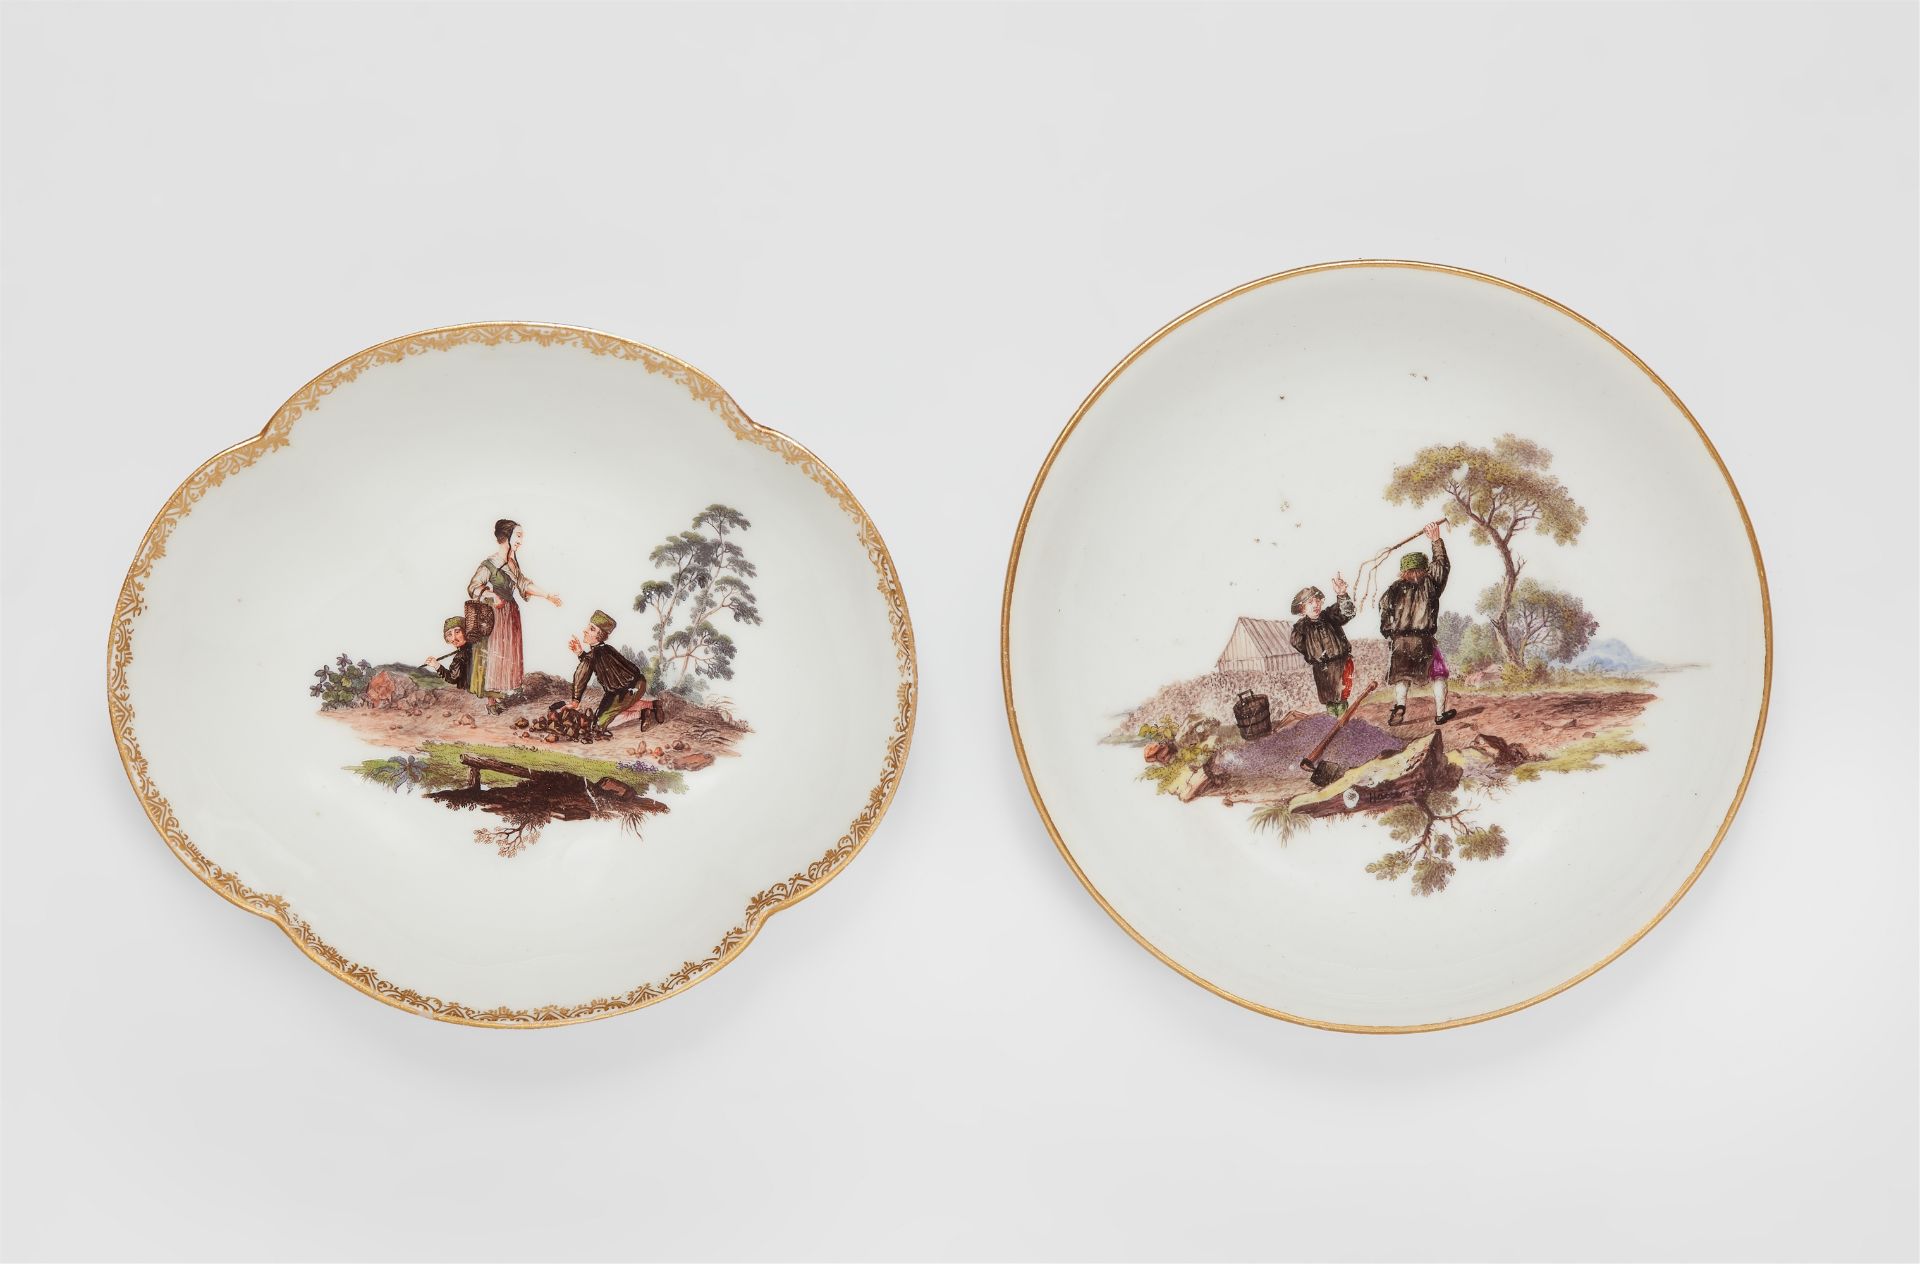 A Meissen porcelain dish and saucer with mining motifs